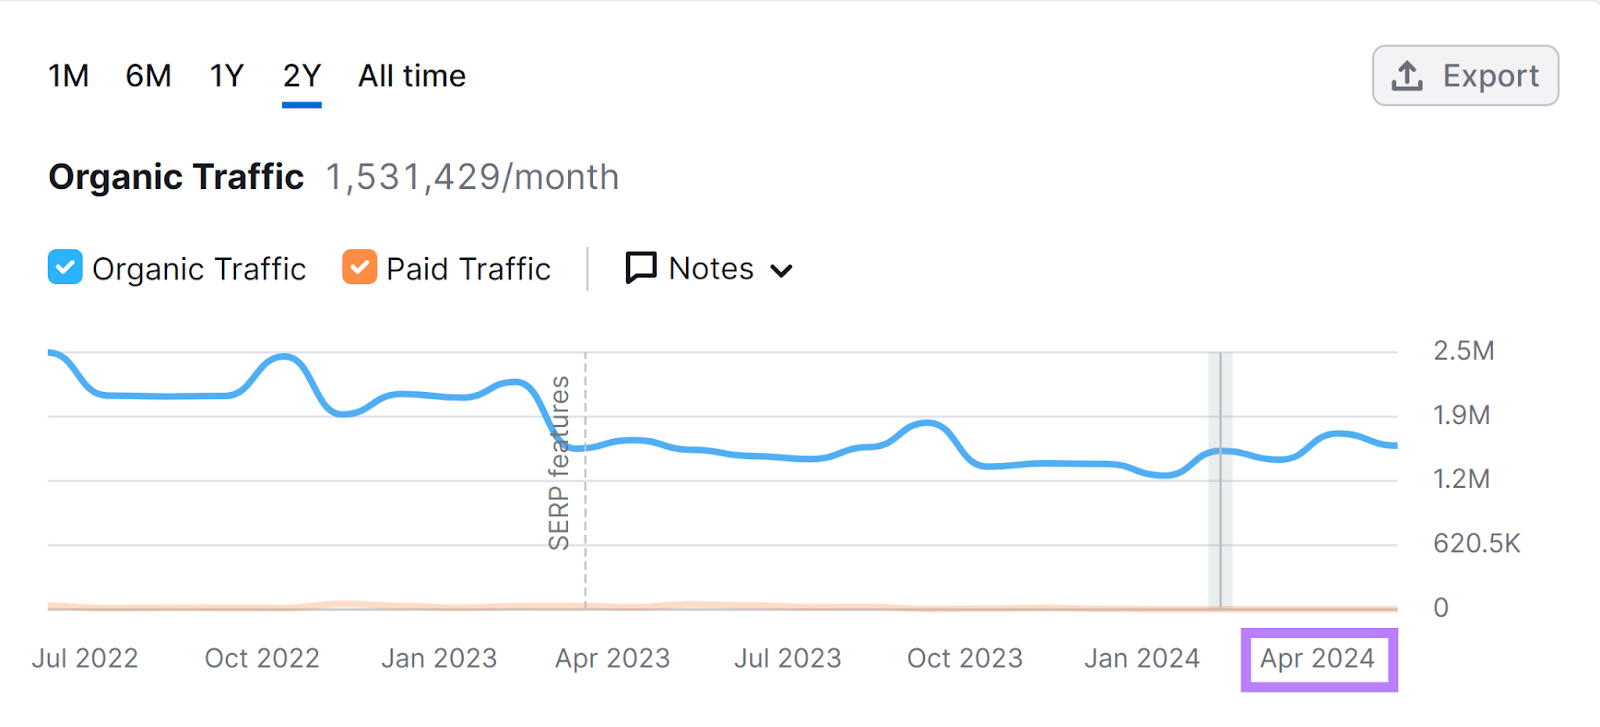 Organic Traffic report in Semrush Domain Overview with 'Apr 2024' highlighted